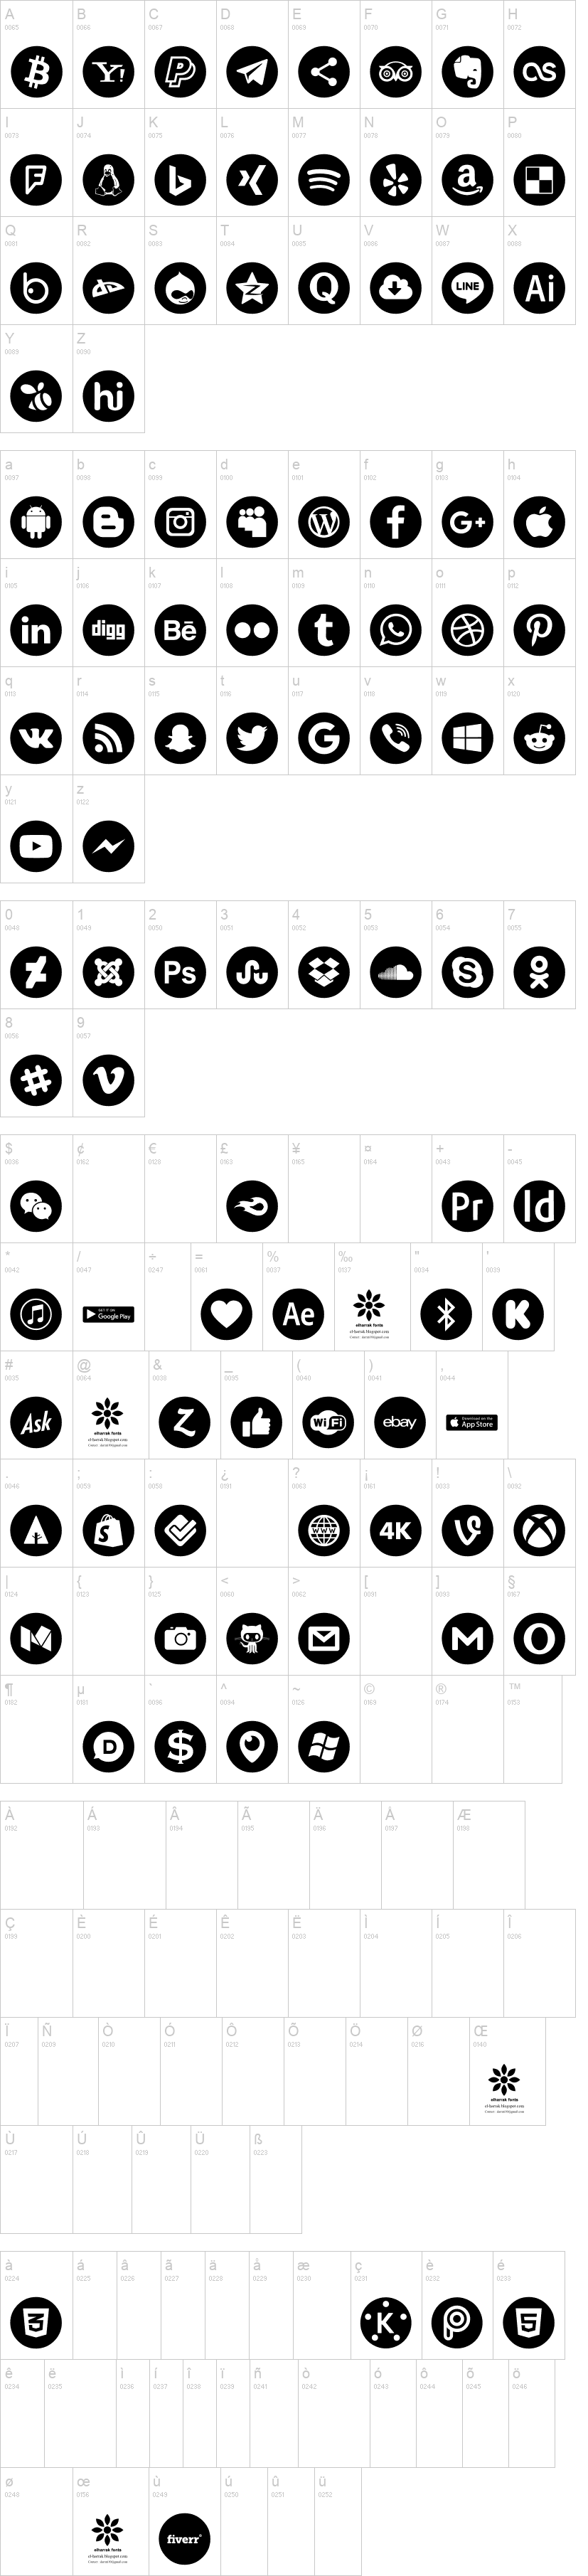 Font 100 Icons